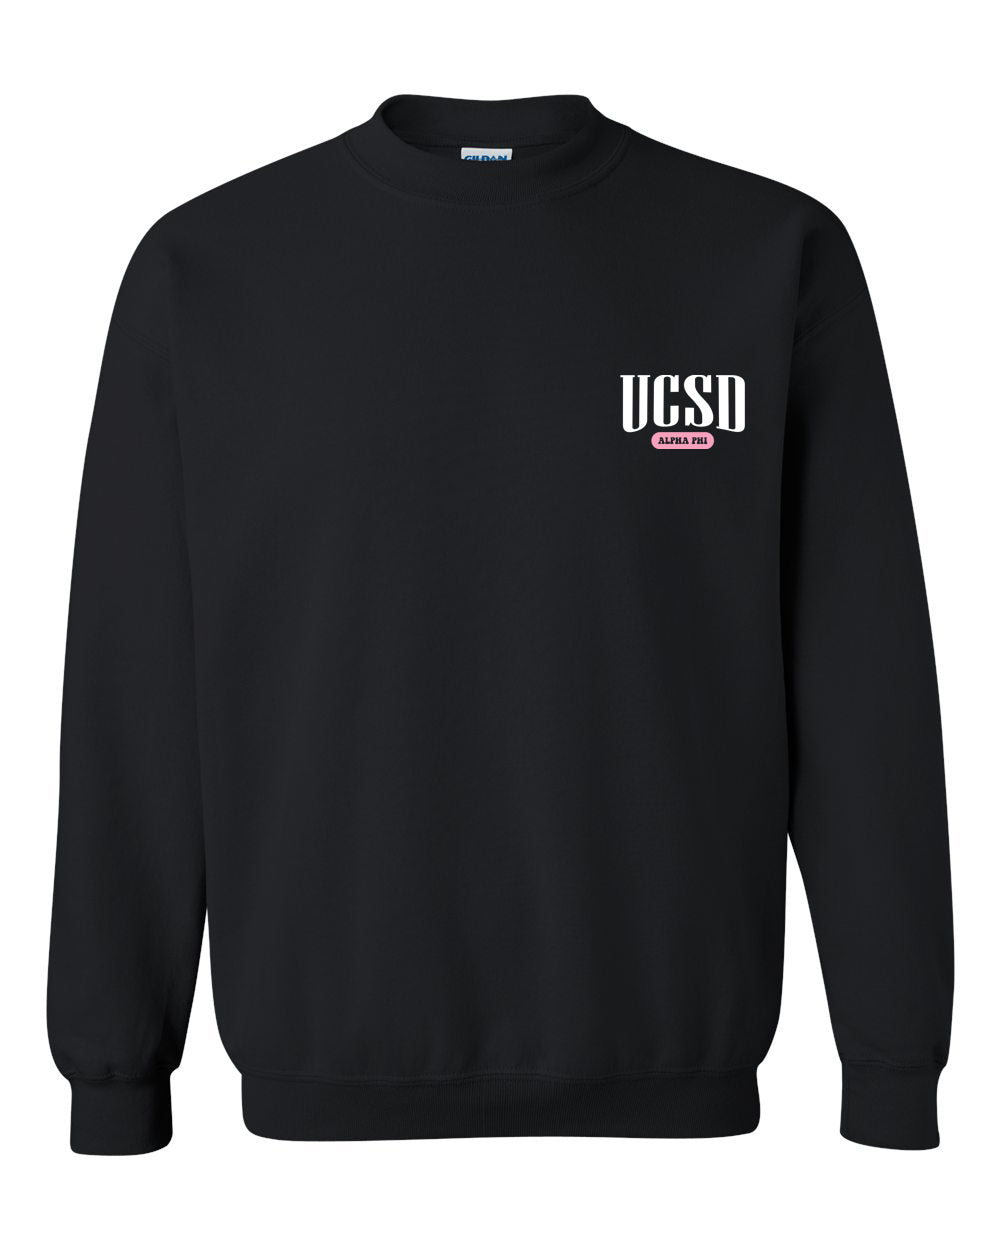 a black sweatshirt with the words ussso on it